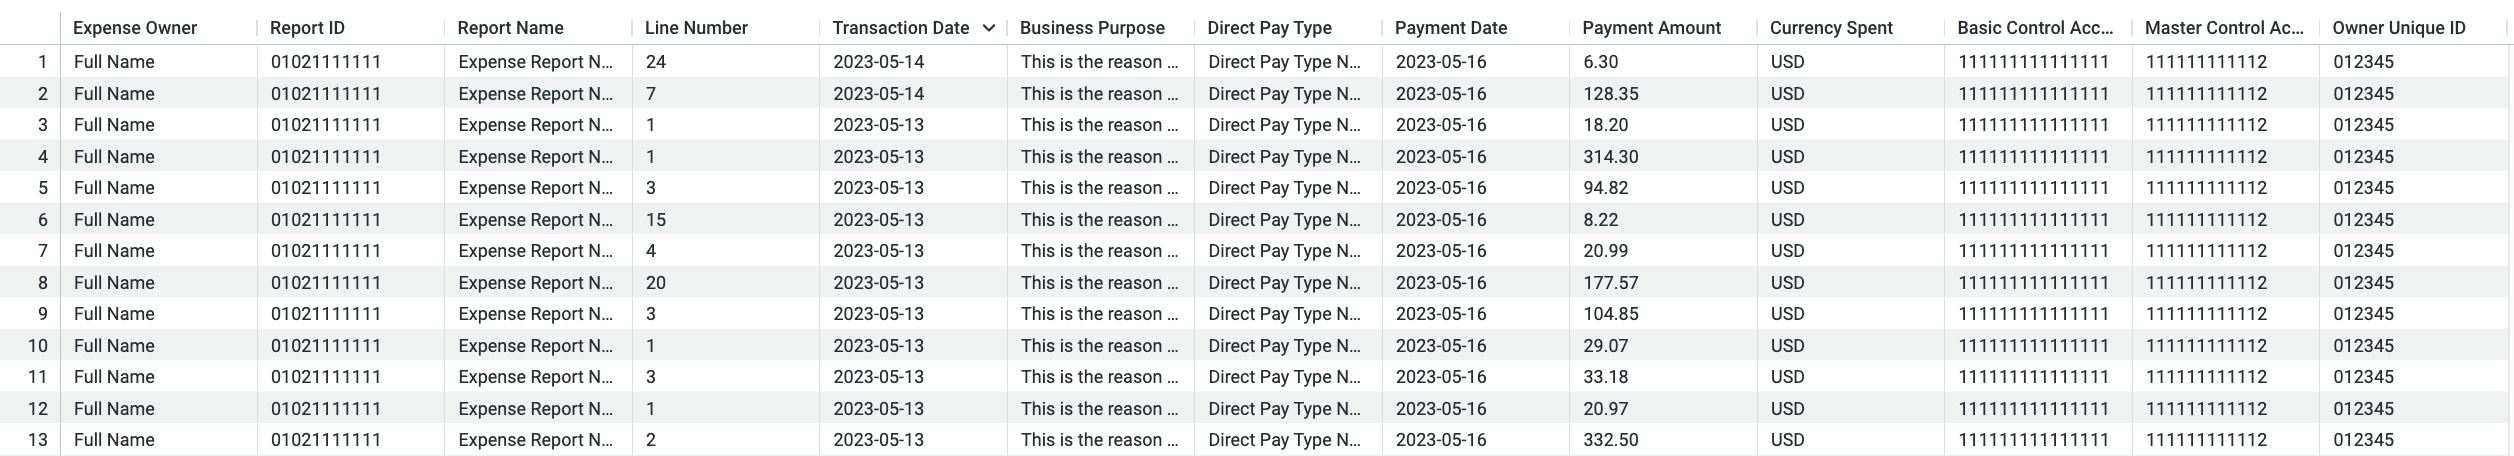 Direct_Pay_Reconciliation_Report.png